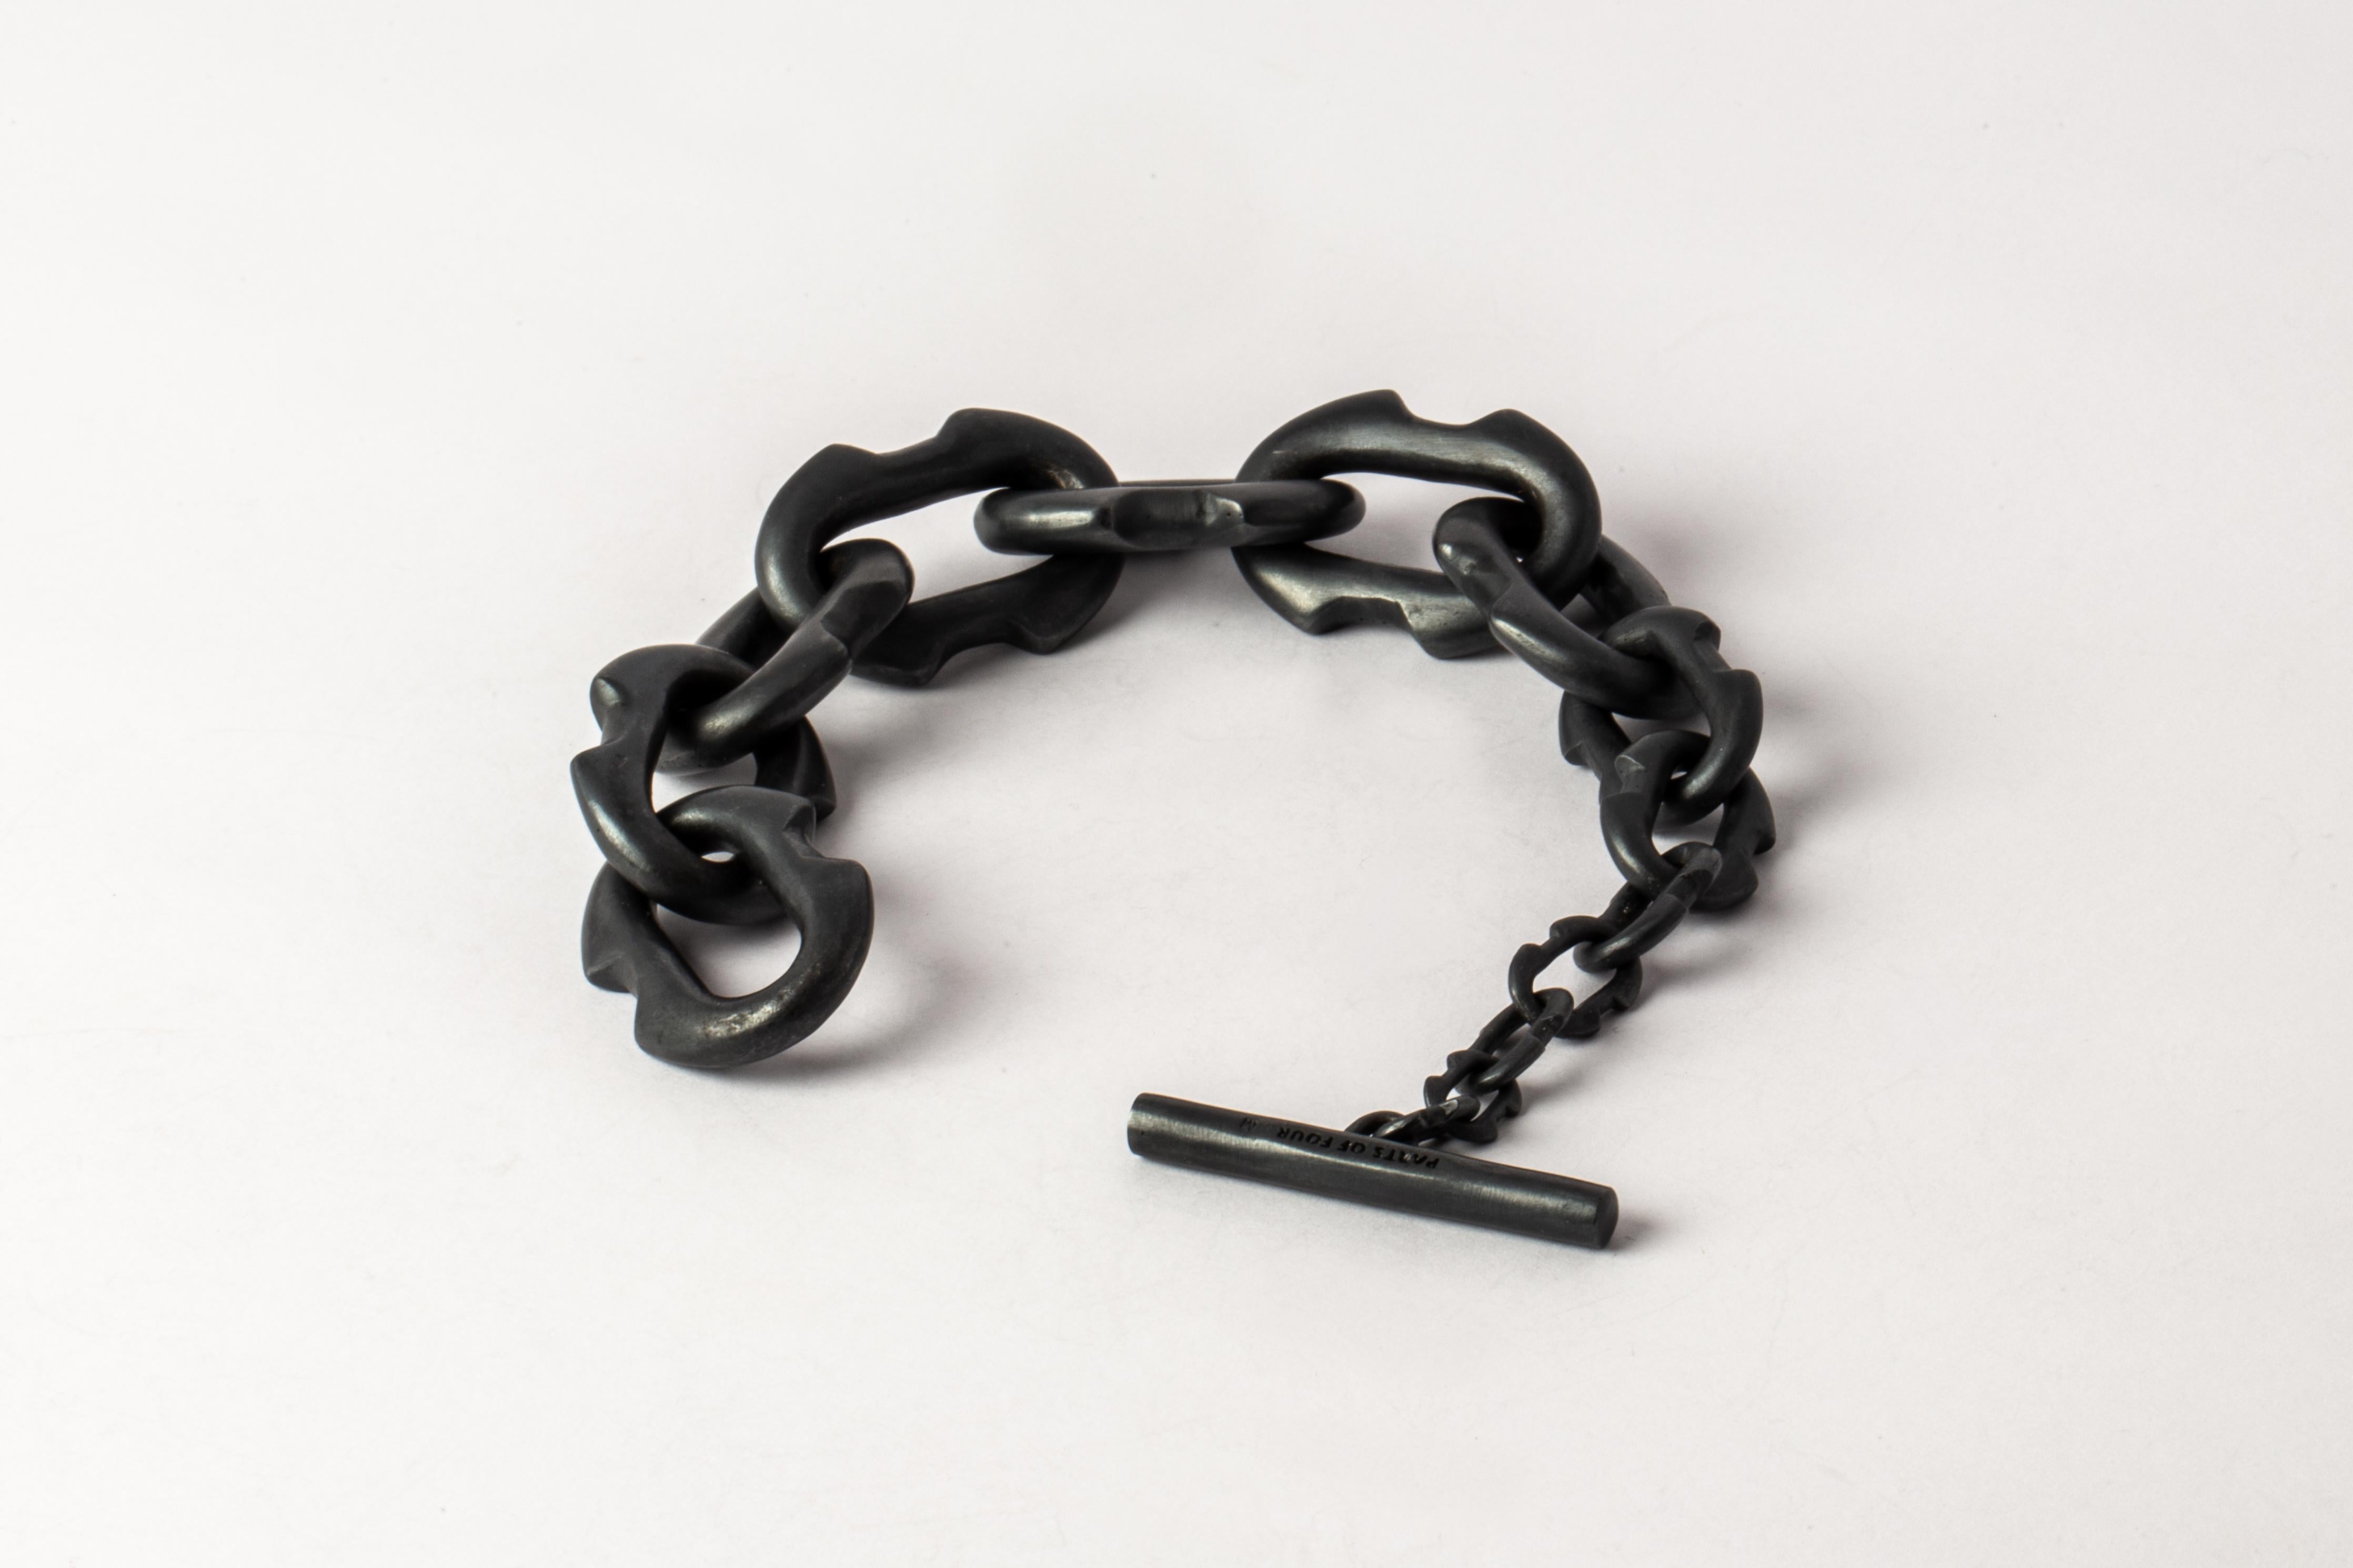 Bracelet in black sterling of oxidized sterling silver. This piece is 100% hand fabricated from metal plate; cut into sections and soldered together to make the hollow three dimensional form. Dimensions Chain link size (L × H): 33 mm × 24 mm
Toggle